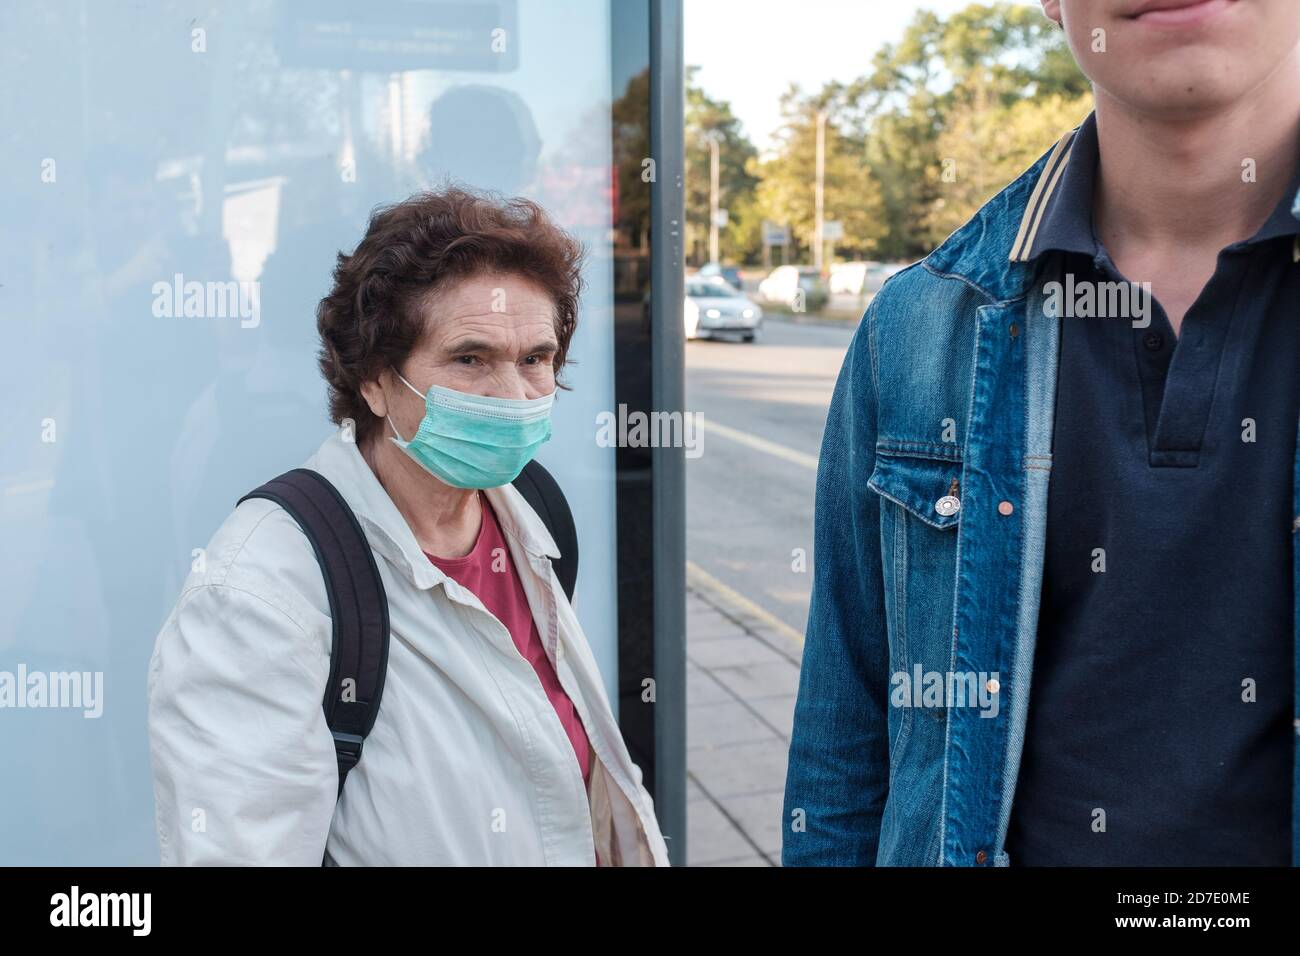 Covid 19-older woman wearing protective face mask next to young man without a mask at bus stop Stock Photo